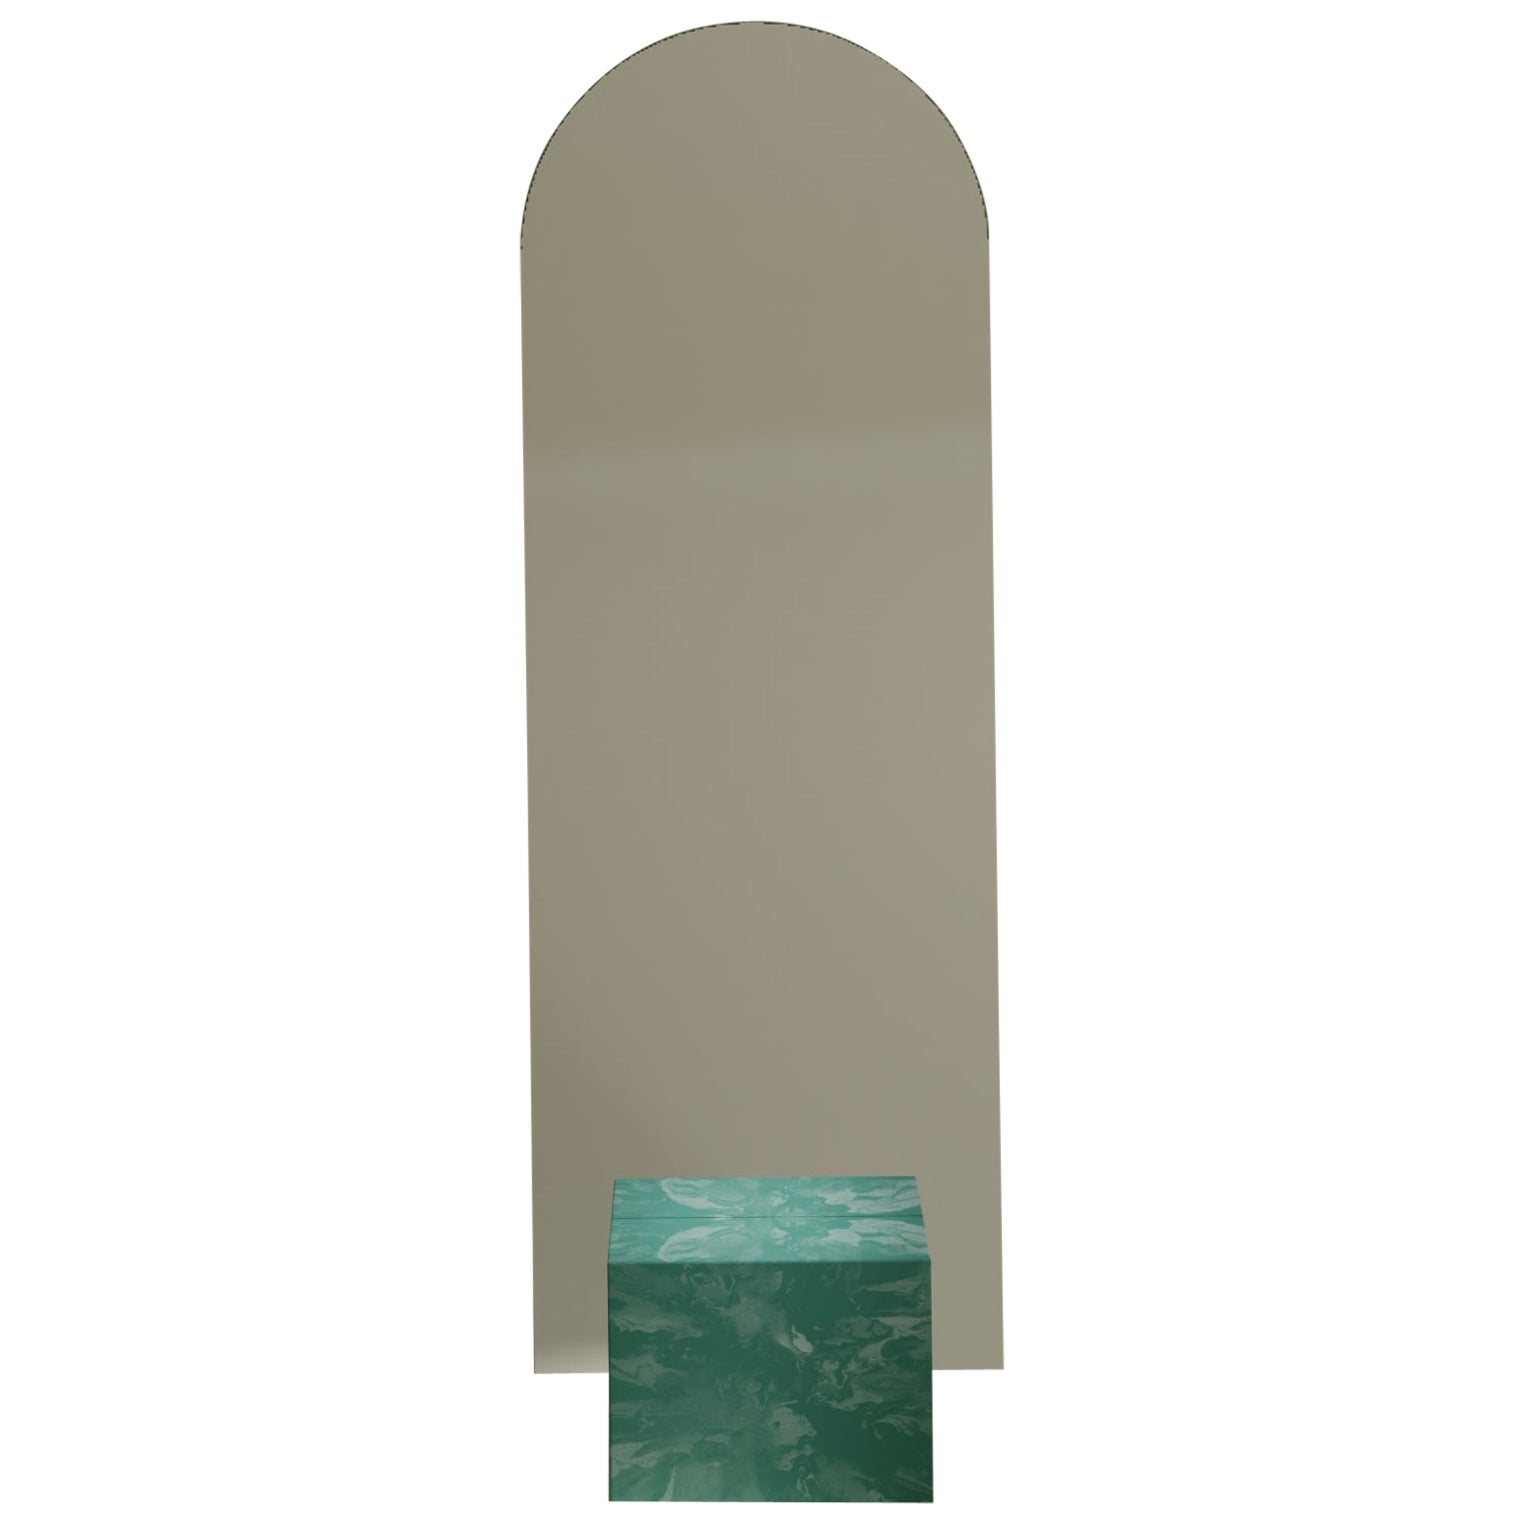 Green Standing Mirror handcrafted from 100% Recycled Plastic by Anqa Studios